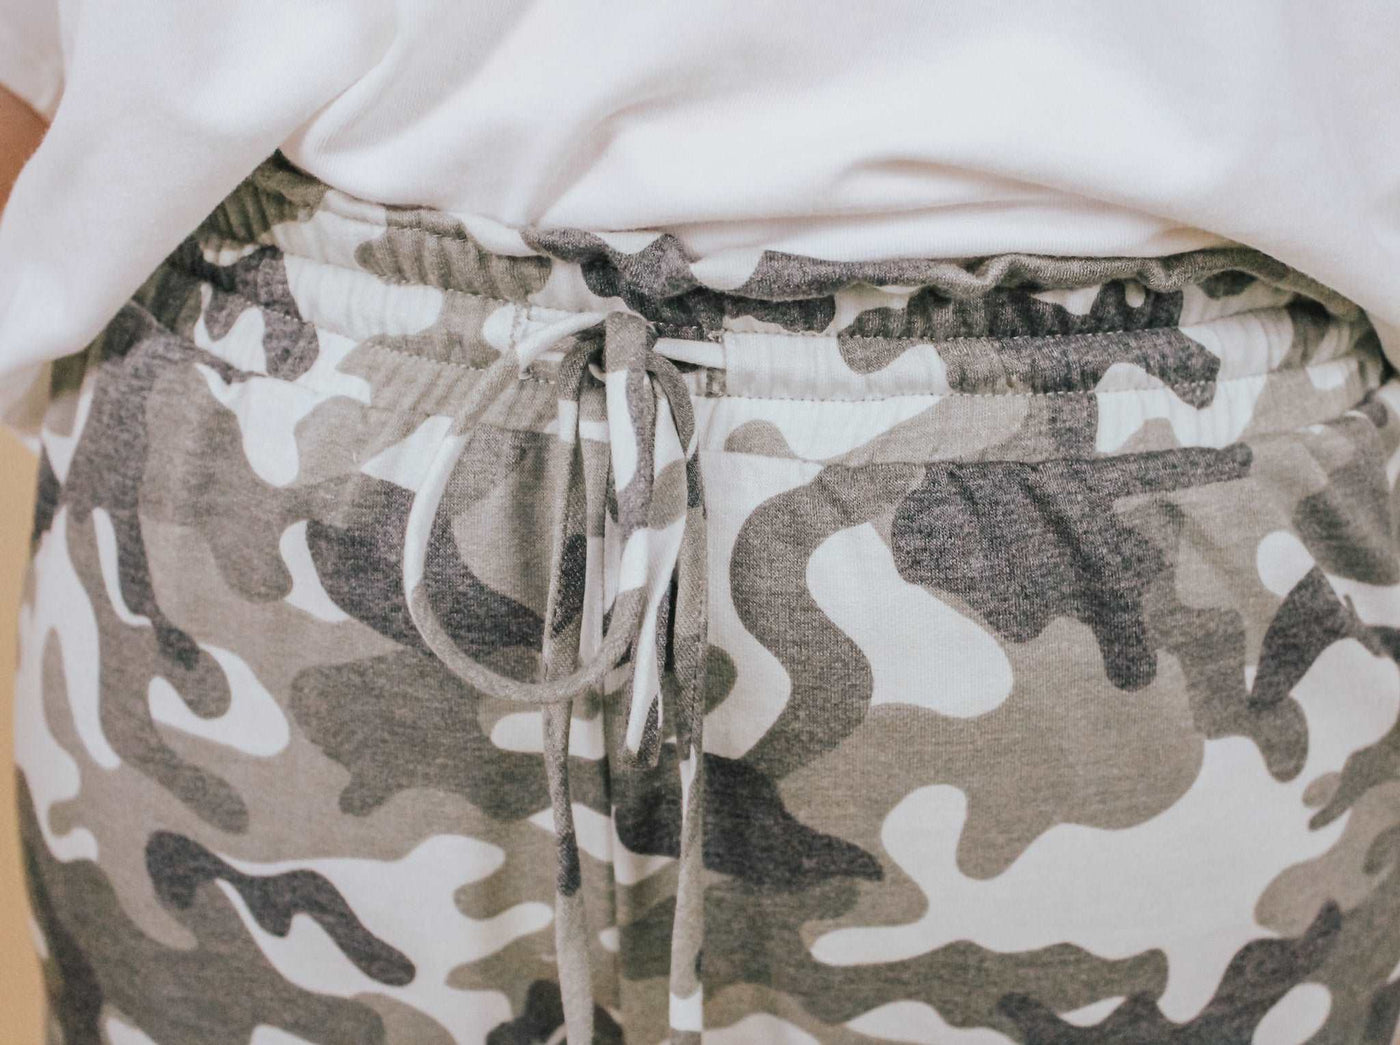 ATTENTION CAMO PAPERBAG JOGGERS